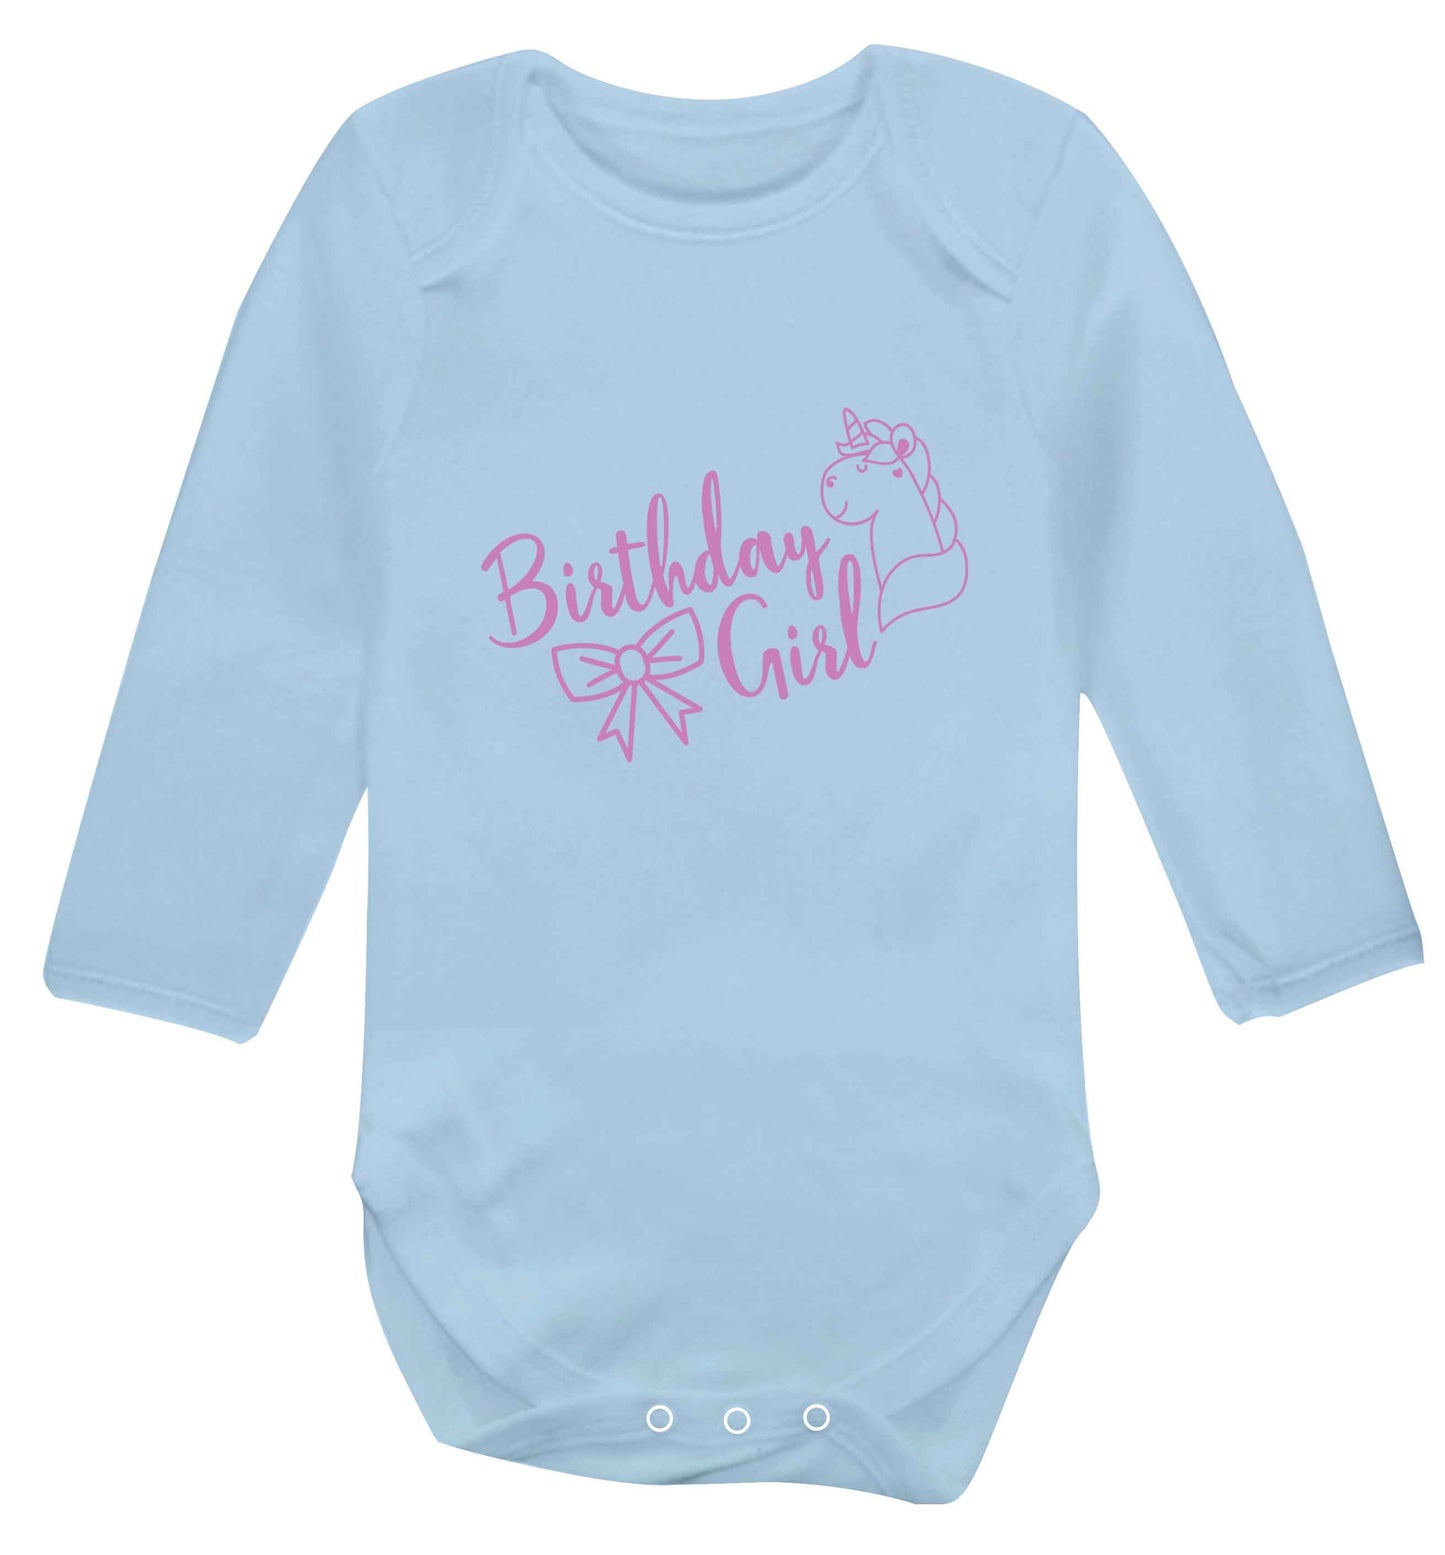 Birthday girl baby vest long sleeved pale blue 6-12 months